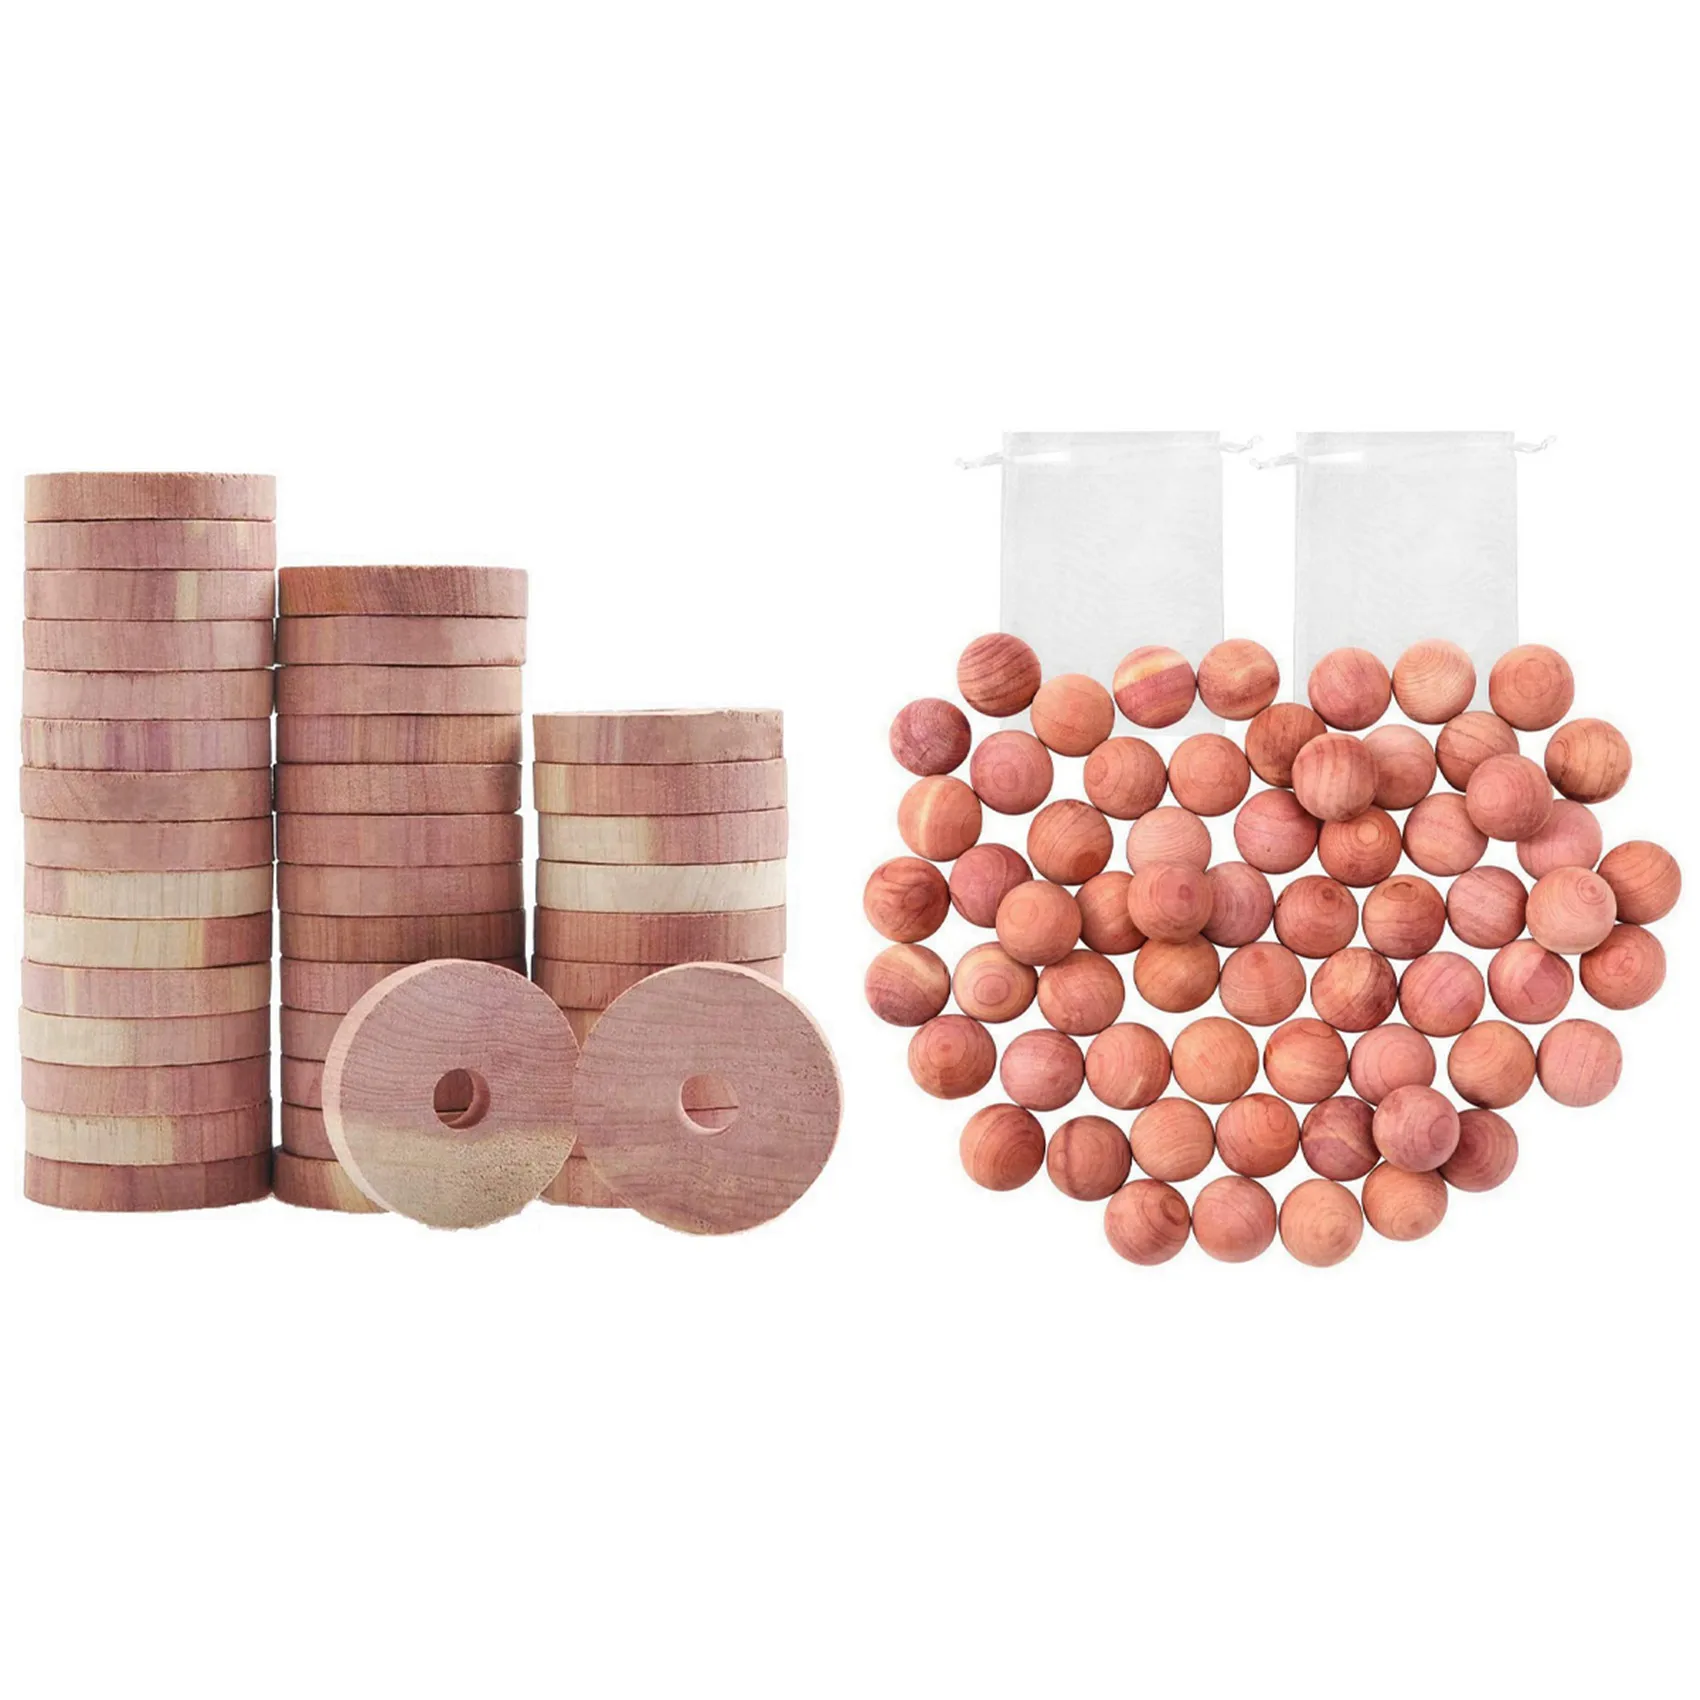 

40 Packs Aromatic Cedar Blocks with 48 Packs Cedar Balls for Closets and Drawers Natural Cedar Balls with 2 Satin Bags